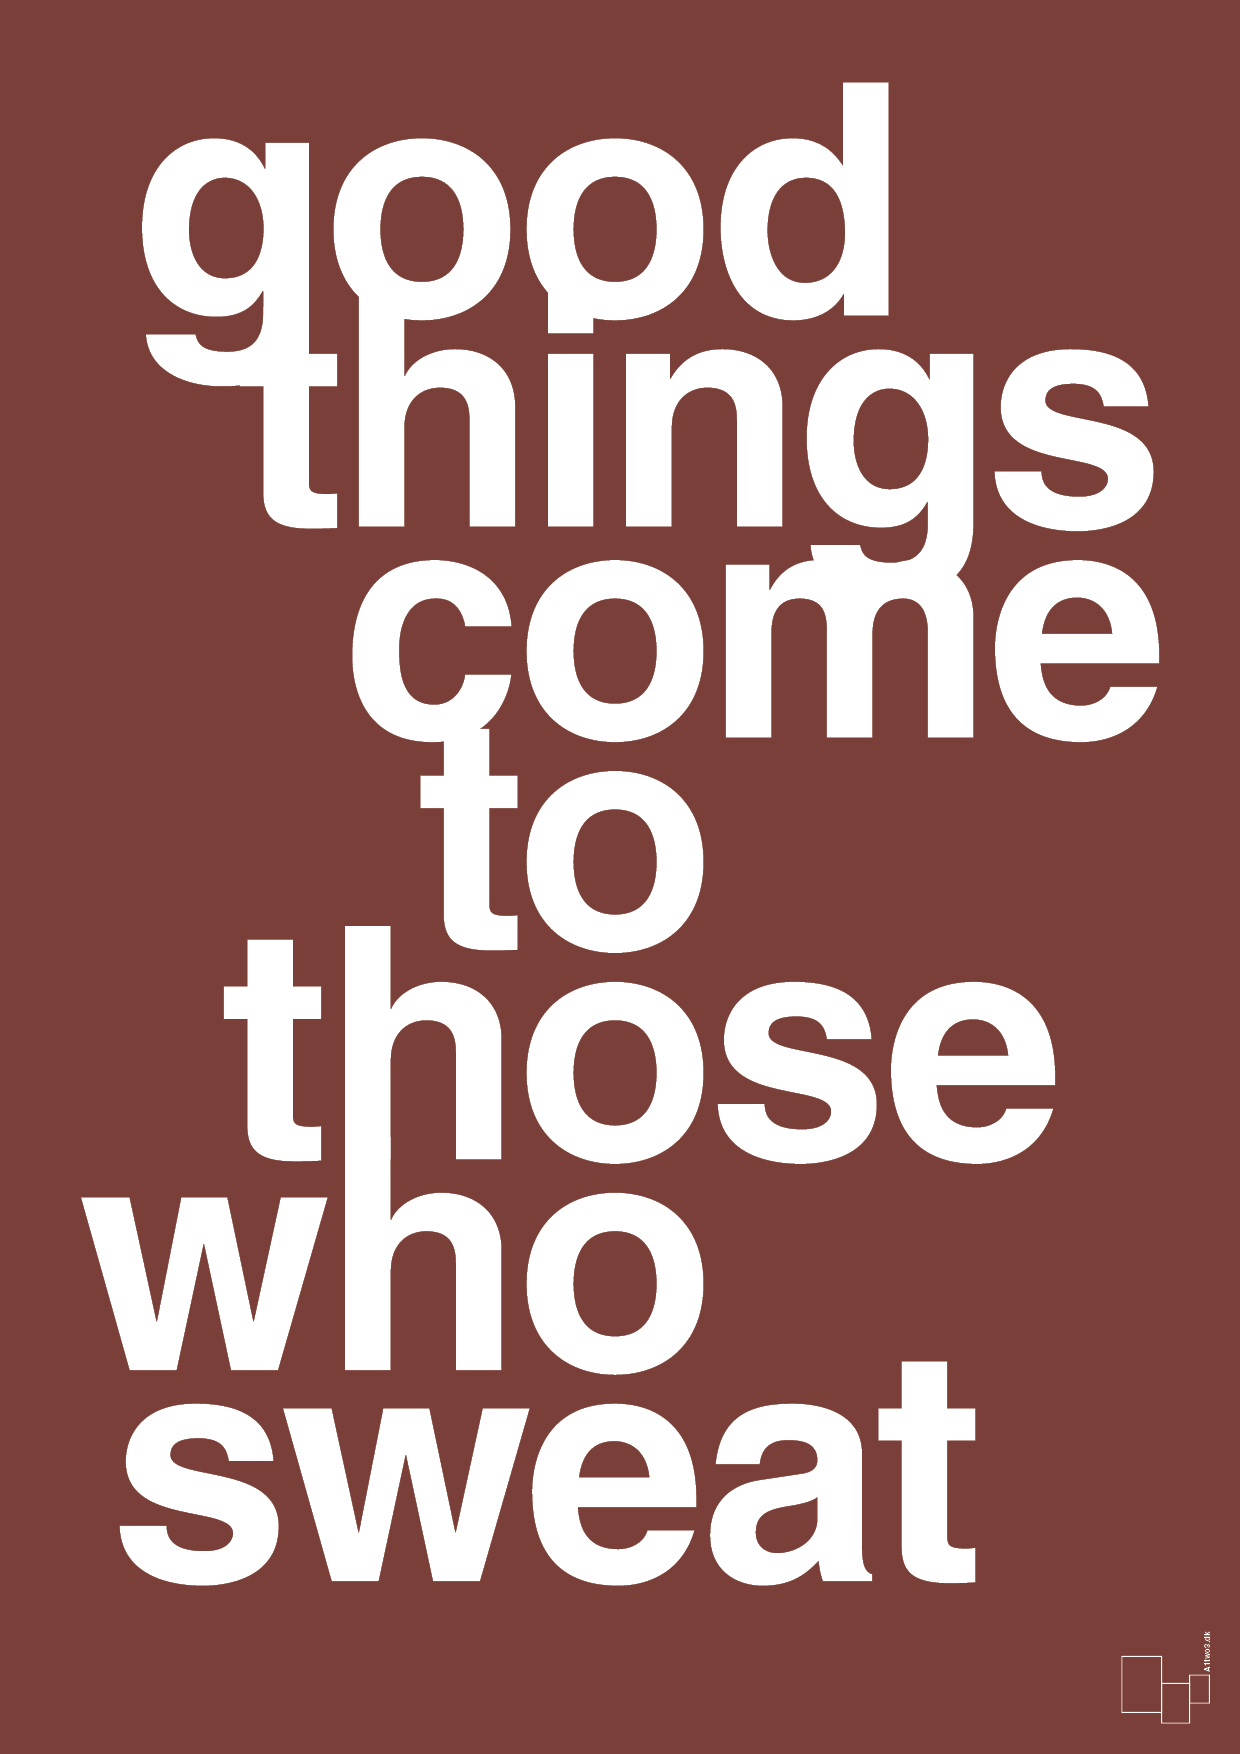 good things come to those who sweat - Plakat med Sport & Fritid i Red Pepper